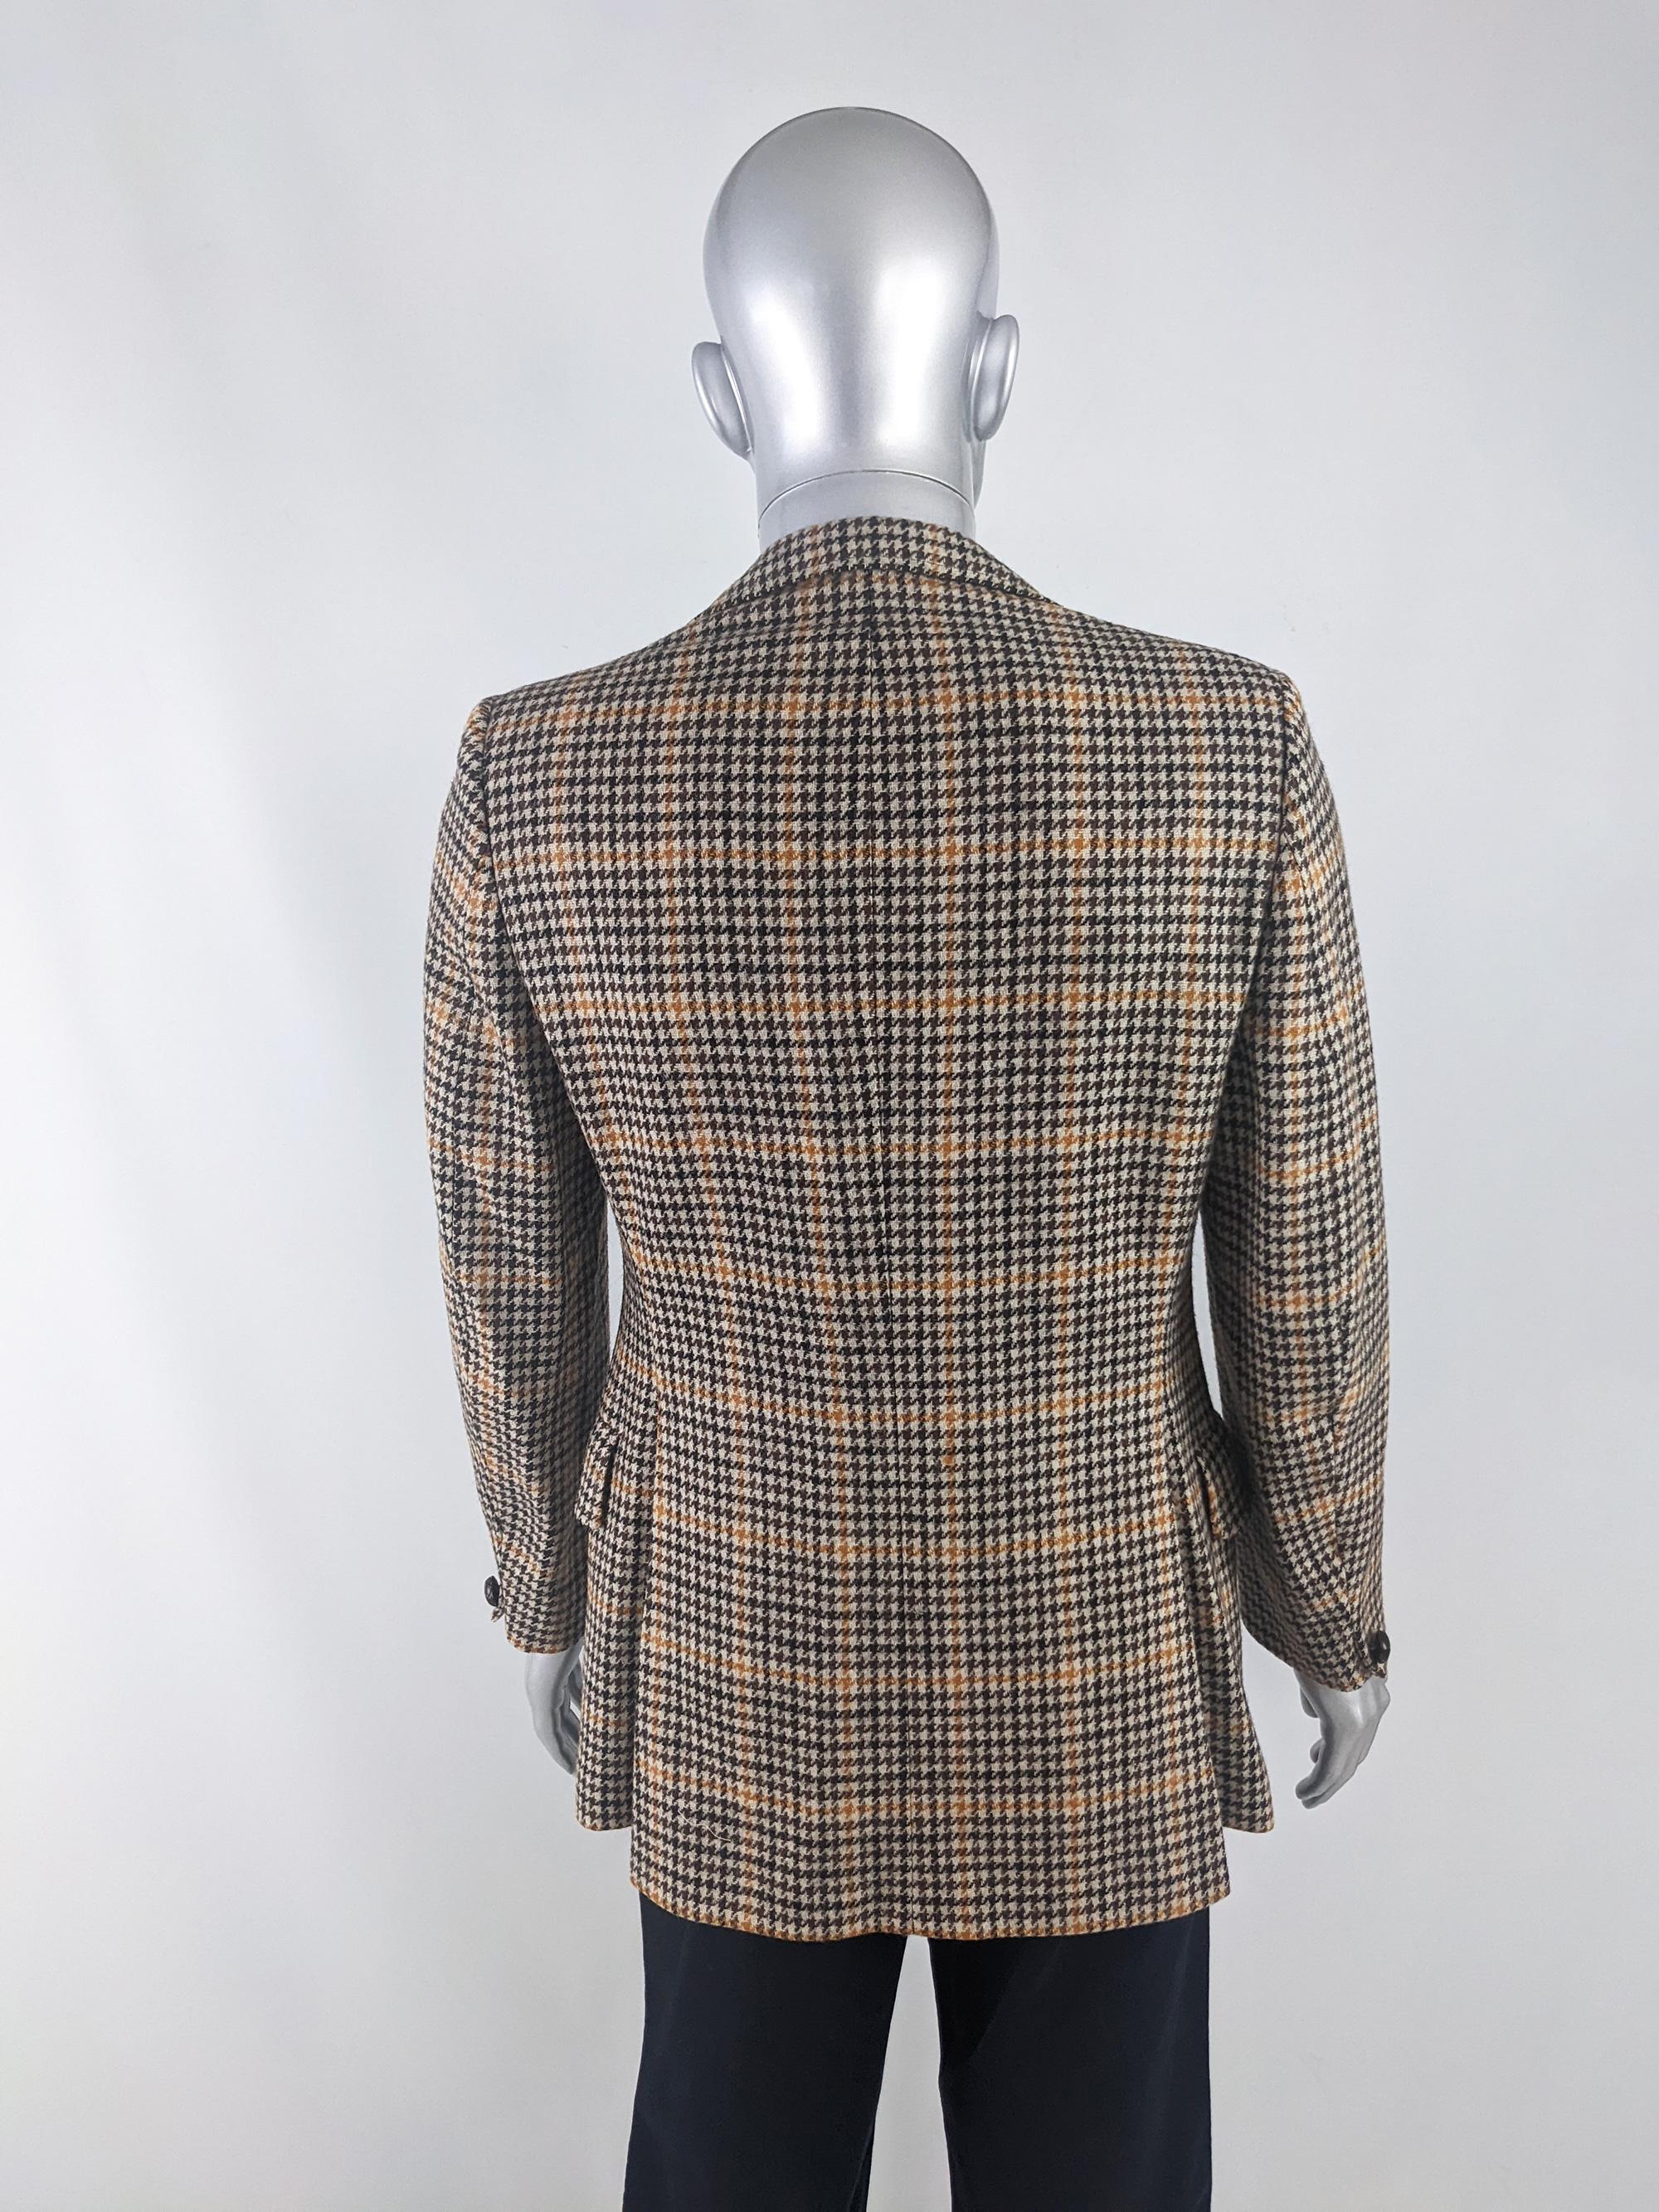 Austin Reed Vintage Mens Wool Tweed & Suede Shooting Blazer Jacket, 1970s In Excellent Condition For Sale In Doncaster, South Yorkshire